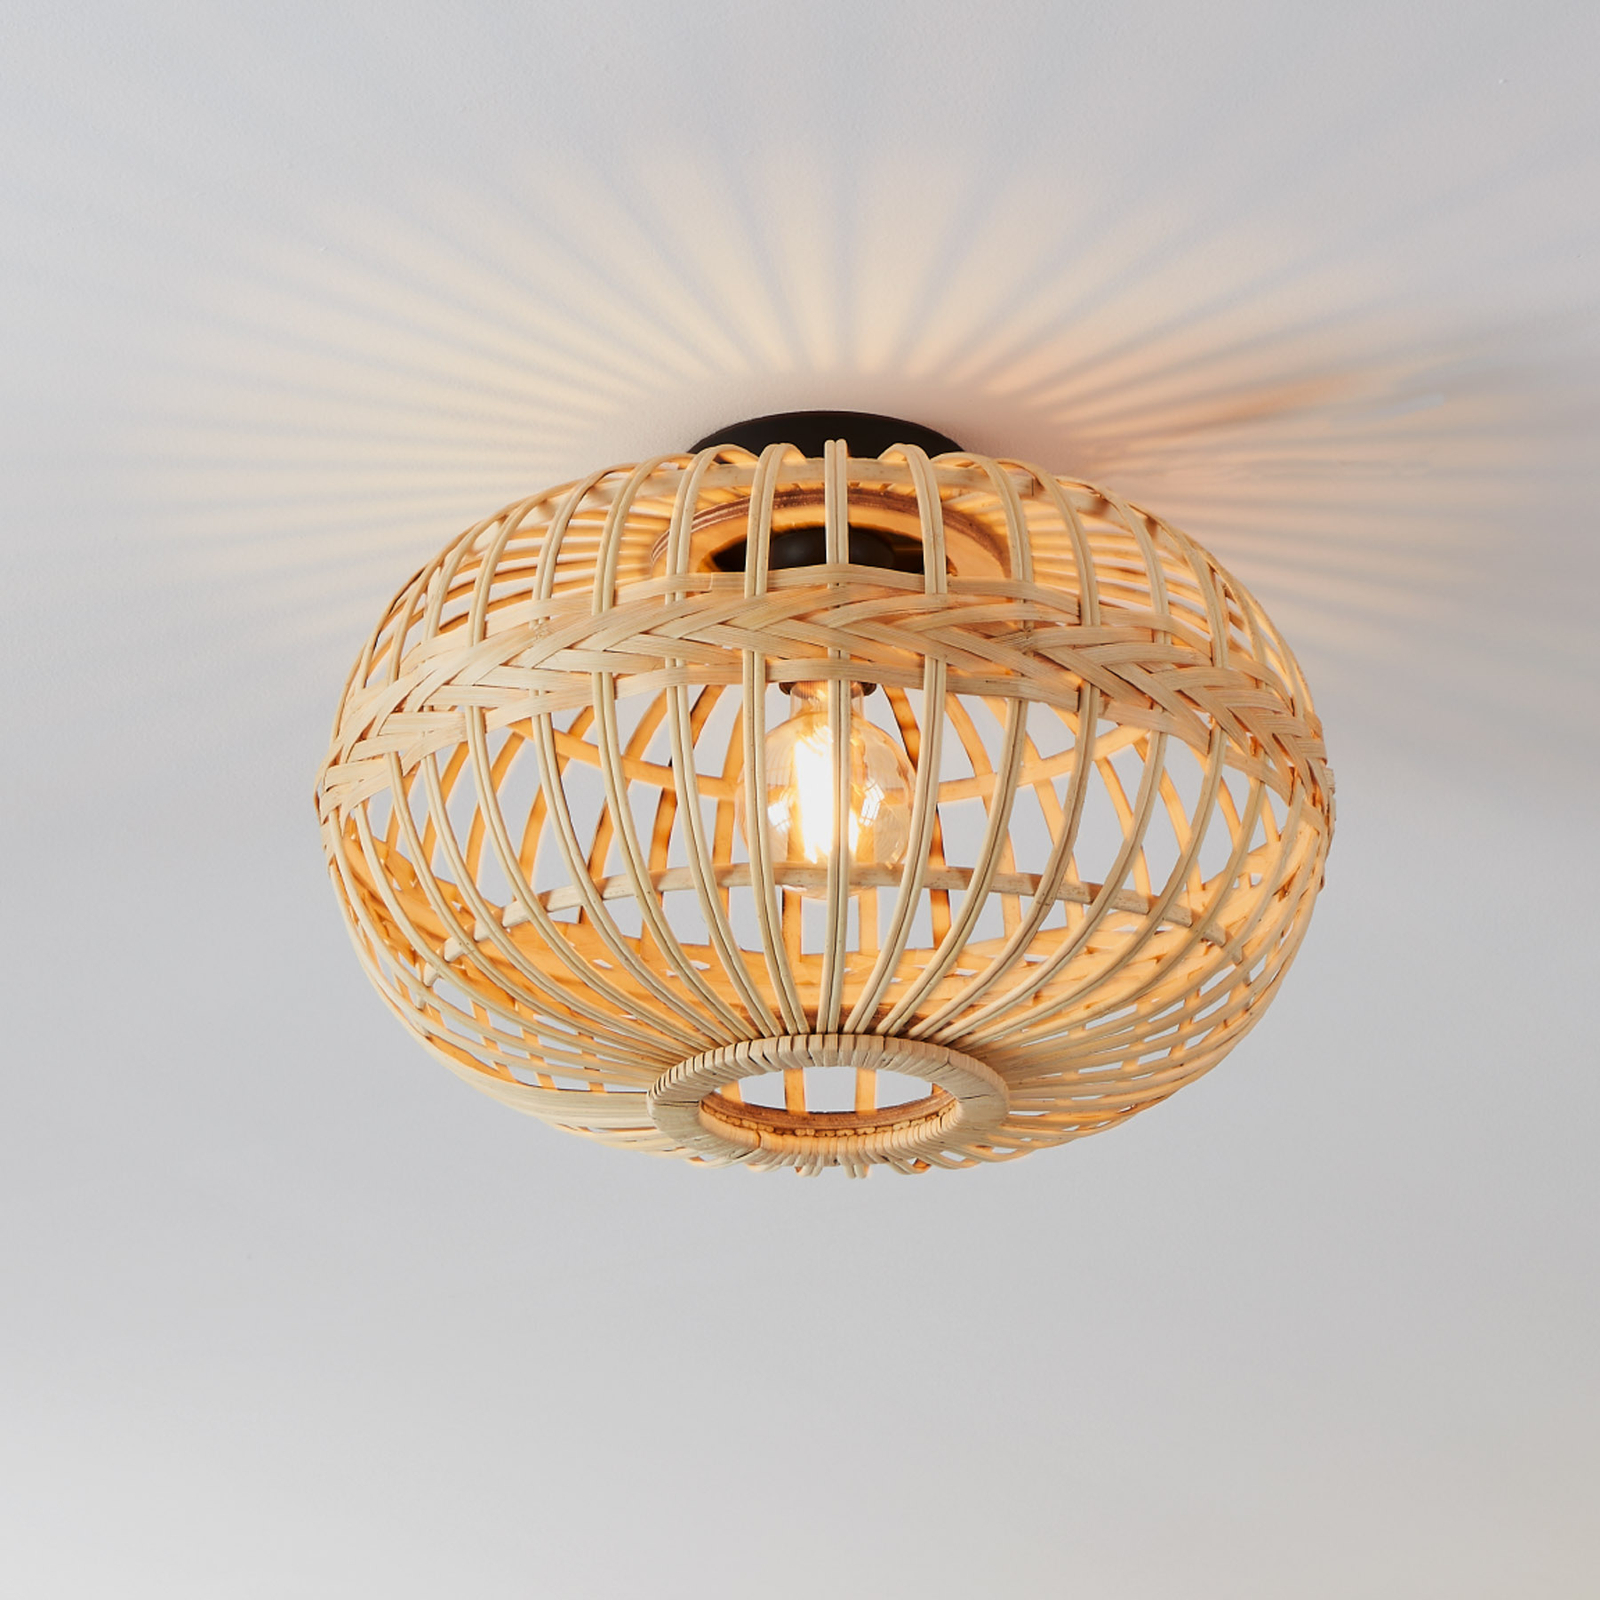 Amsfield ceiling light made of bamboo, oval